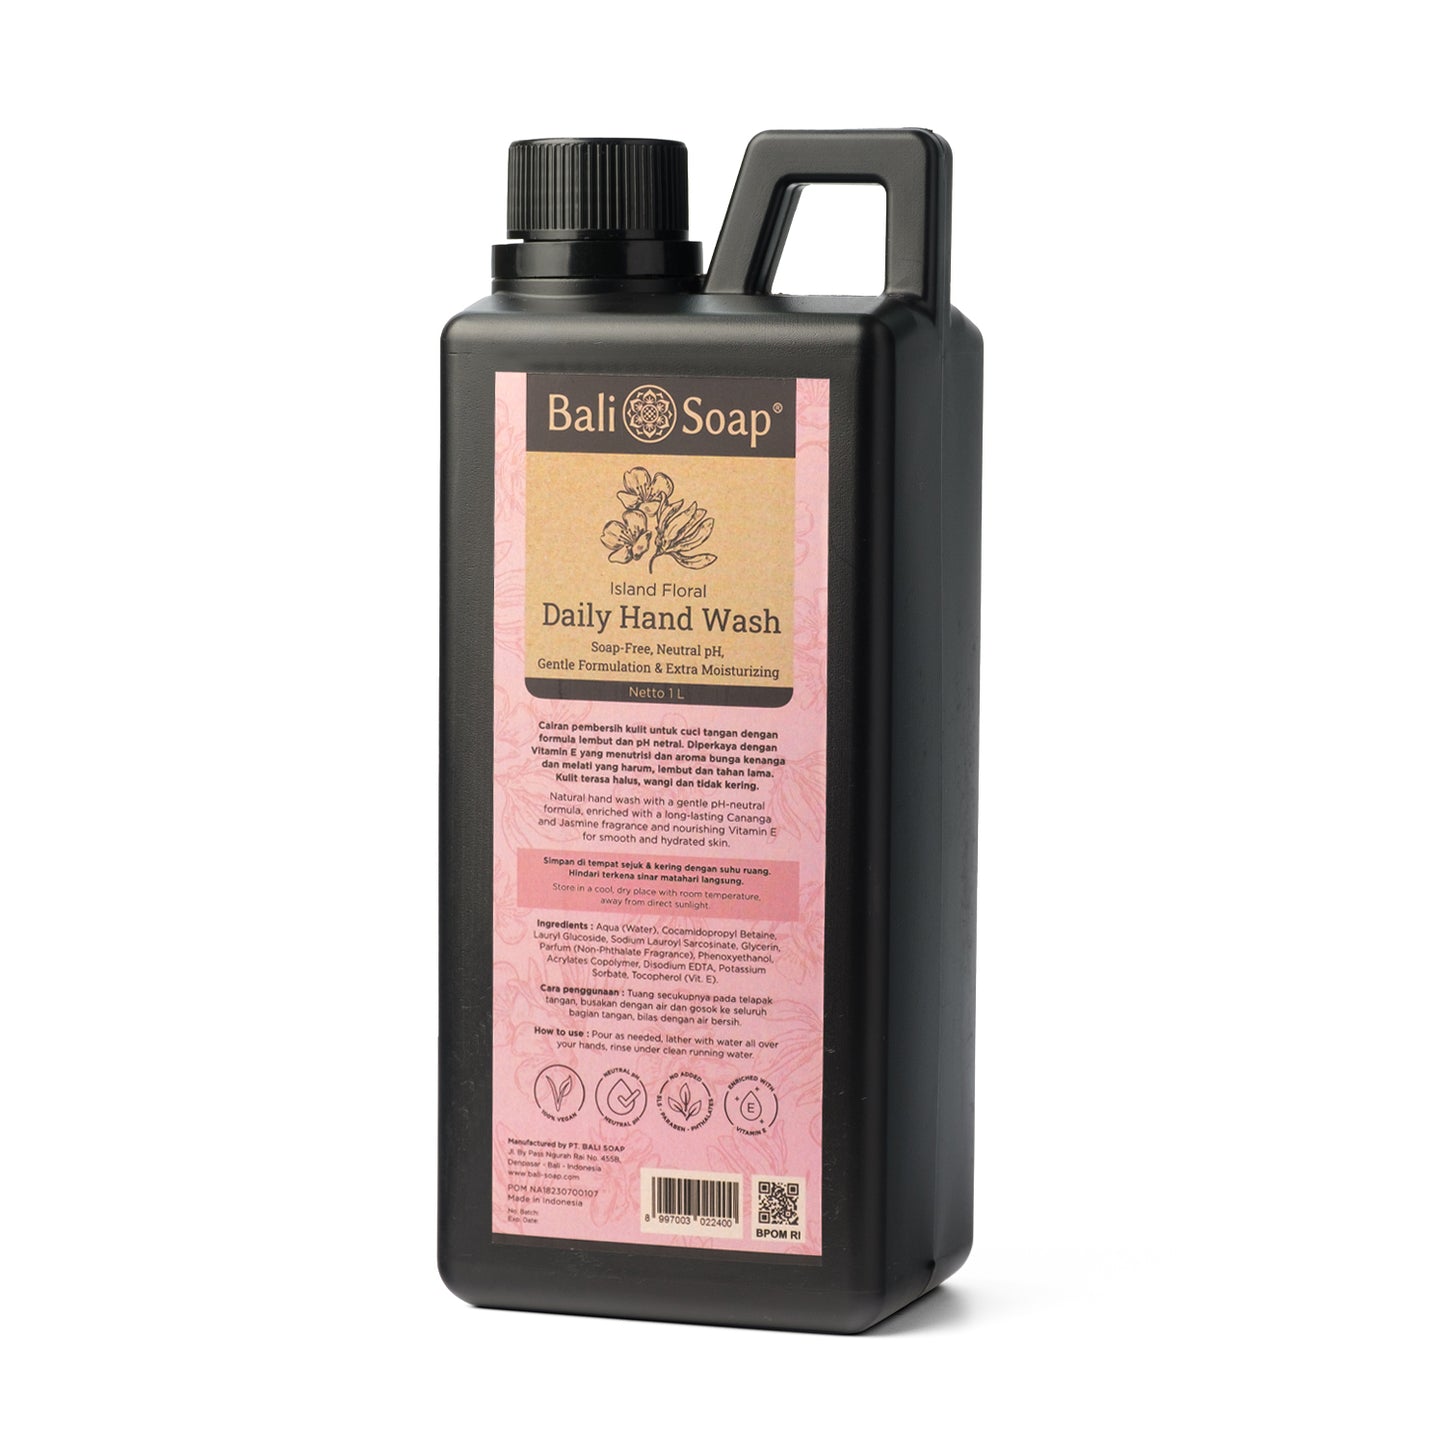 Bali Soap - Island Floral - Daily Hand Wash 1 Liter